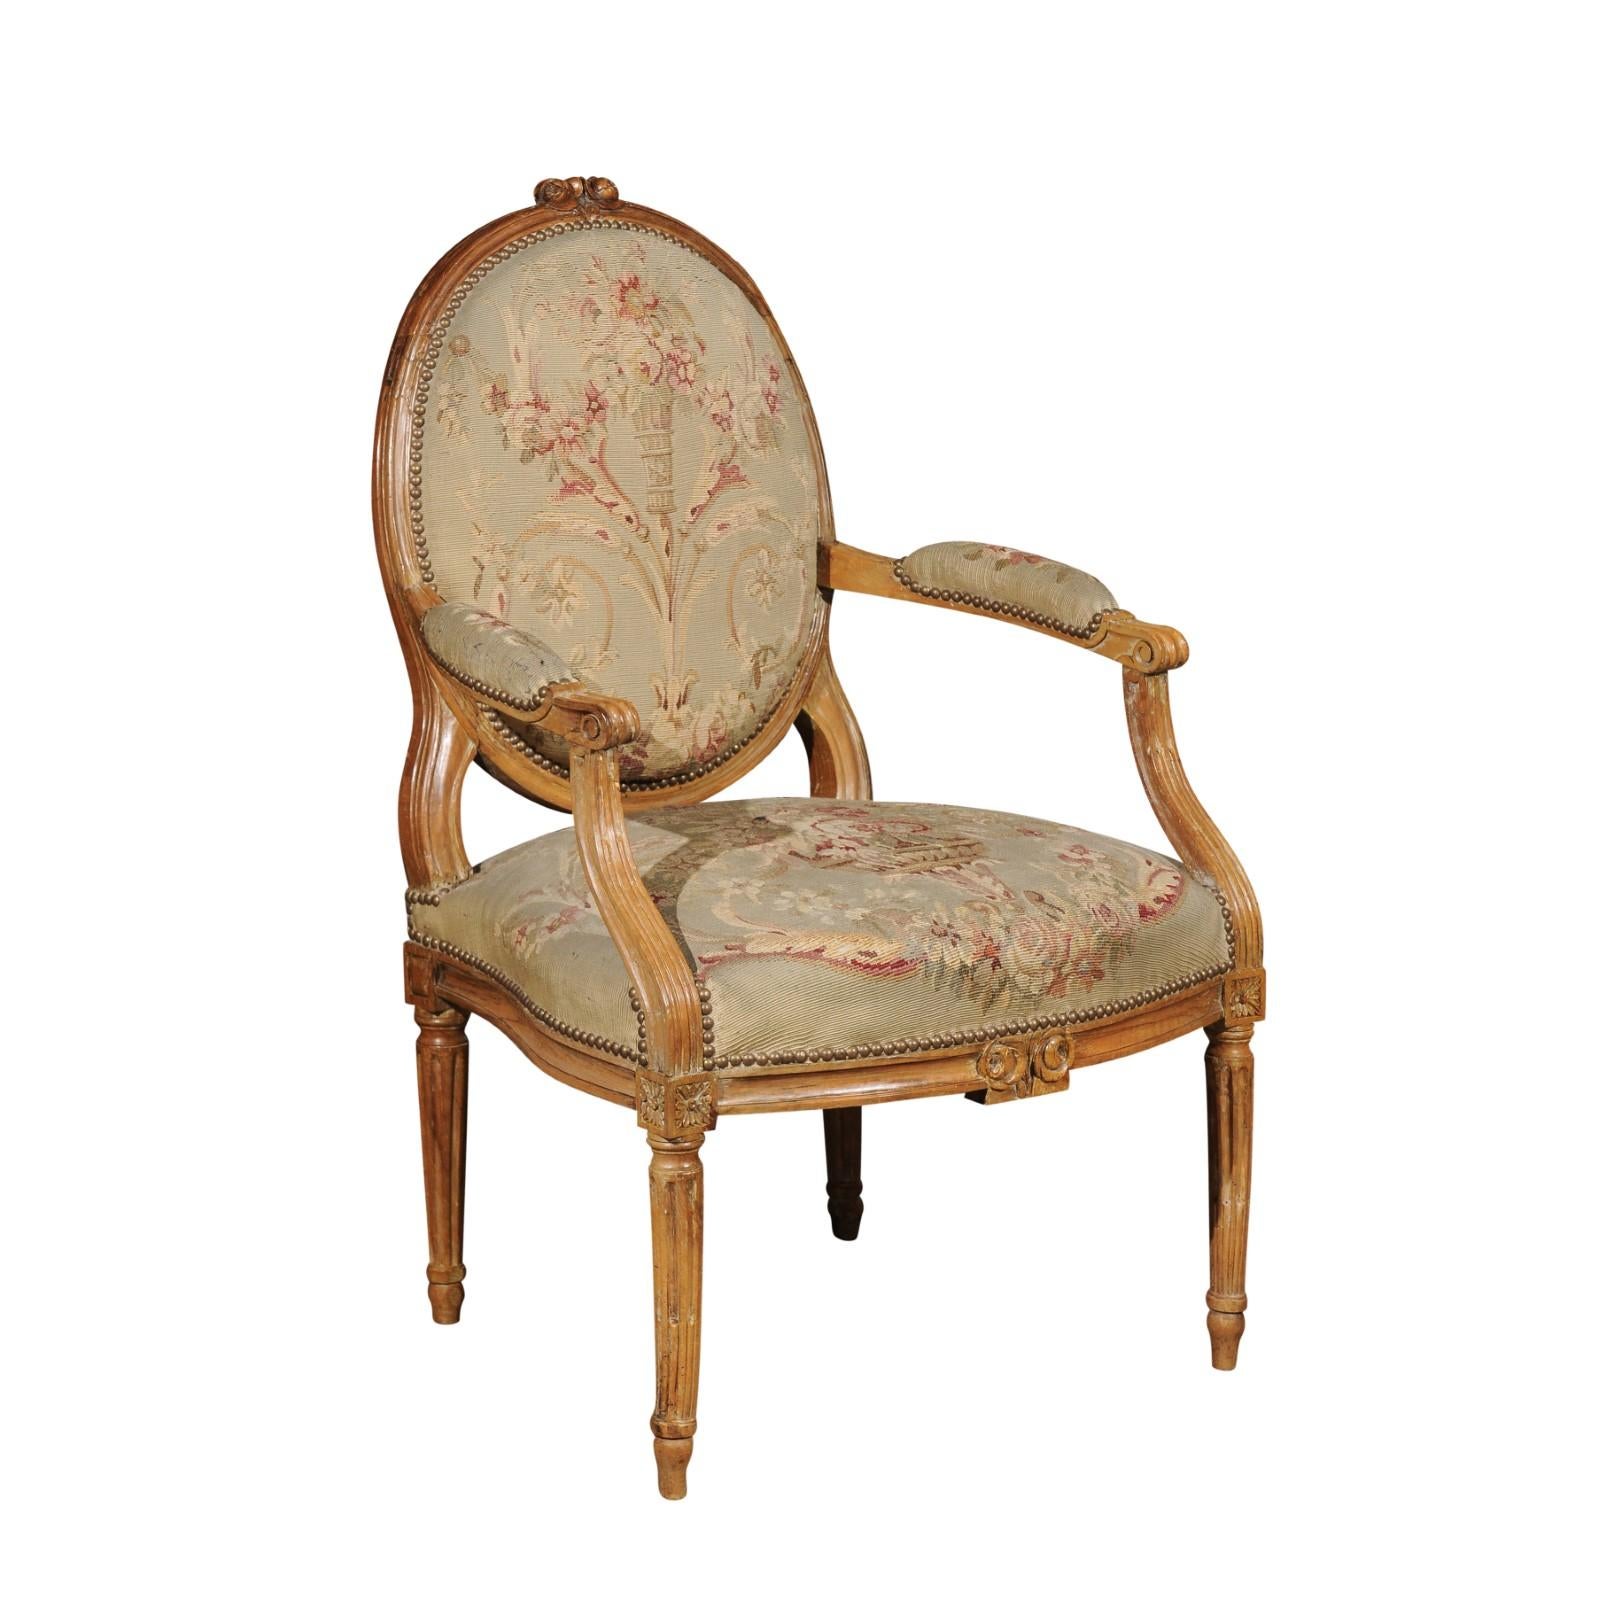 French Louis XVI Period 18th Century Armchair with Floral Tapestry Upholstery For Sale